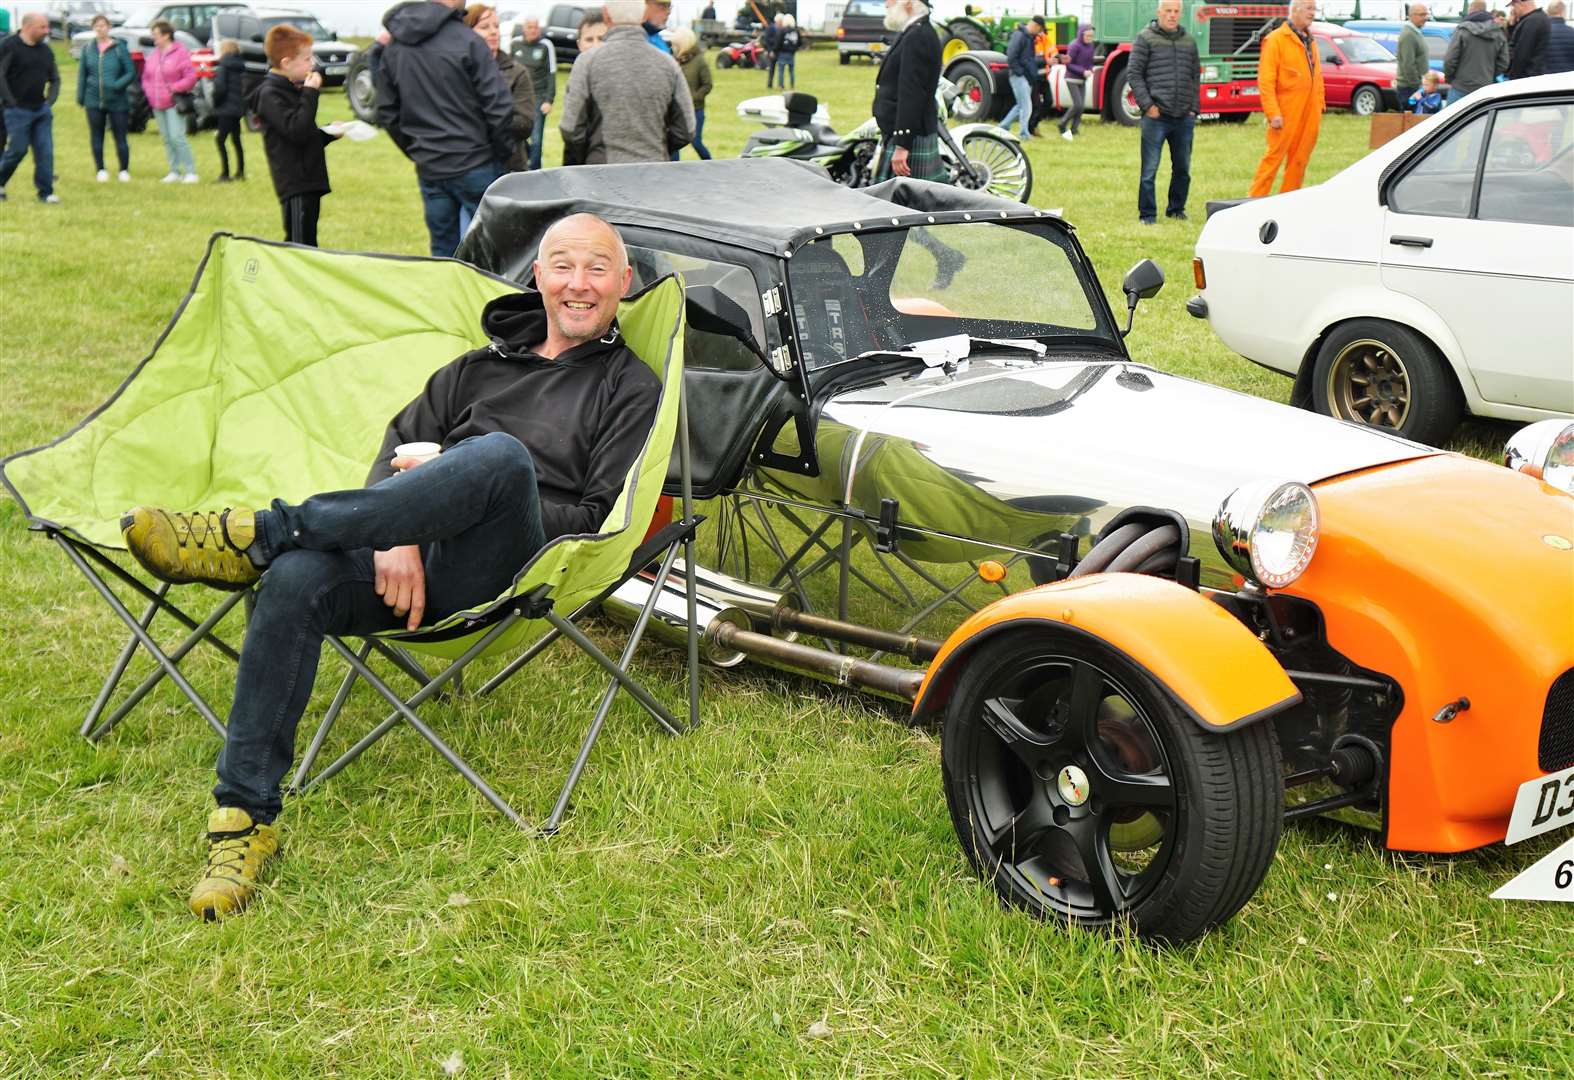 Vintage delights at John O’Groats for classic rally